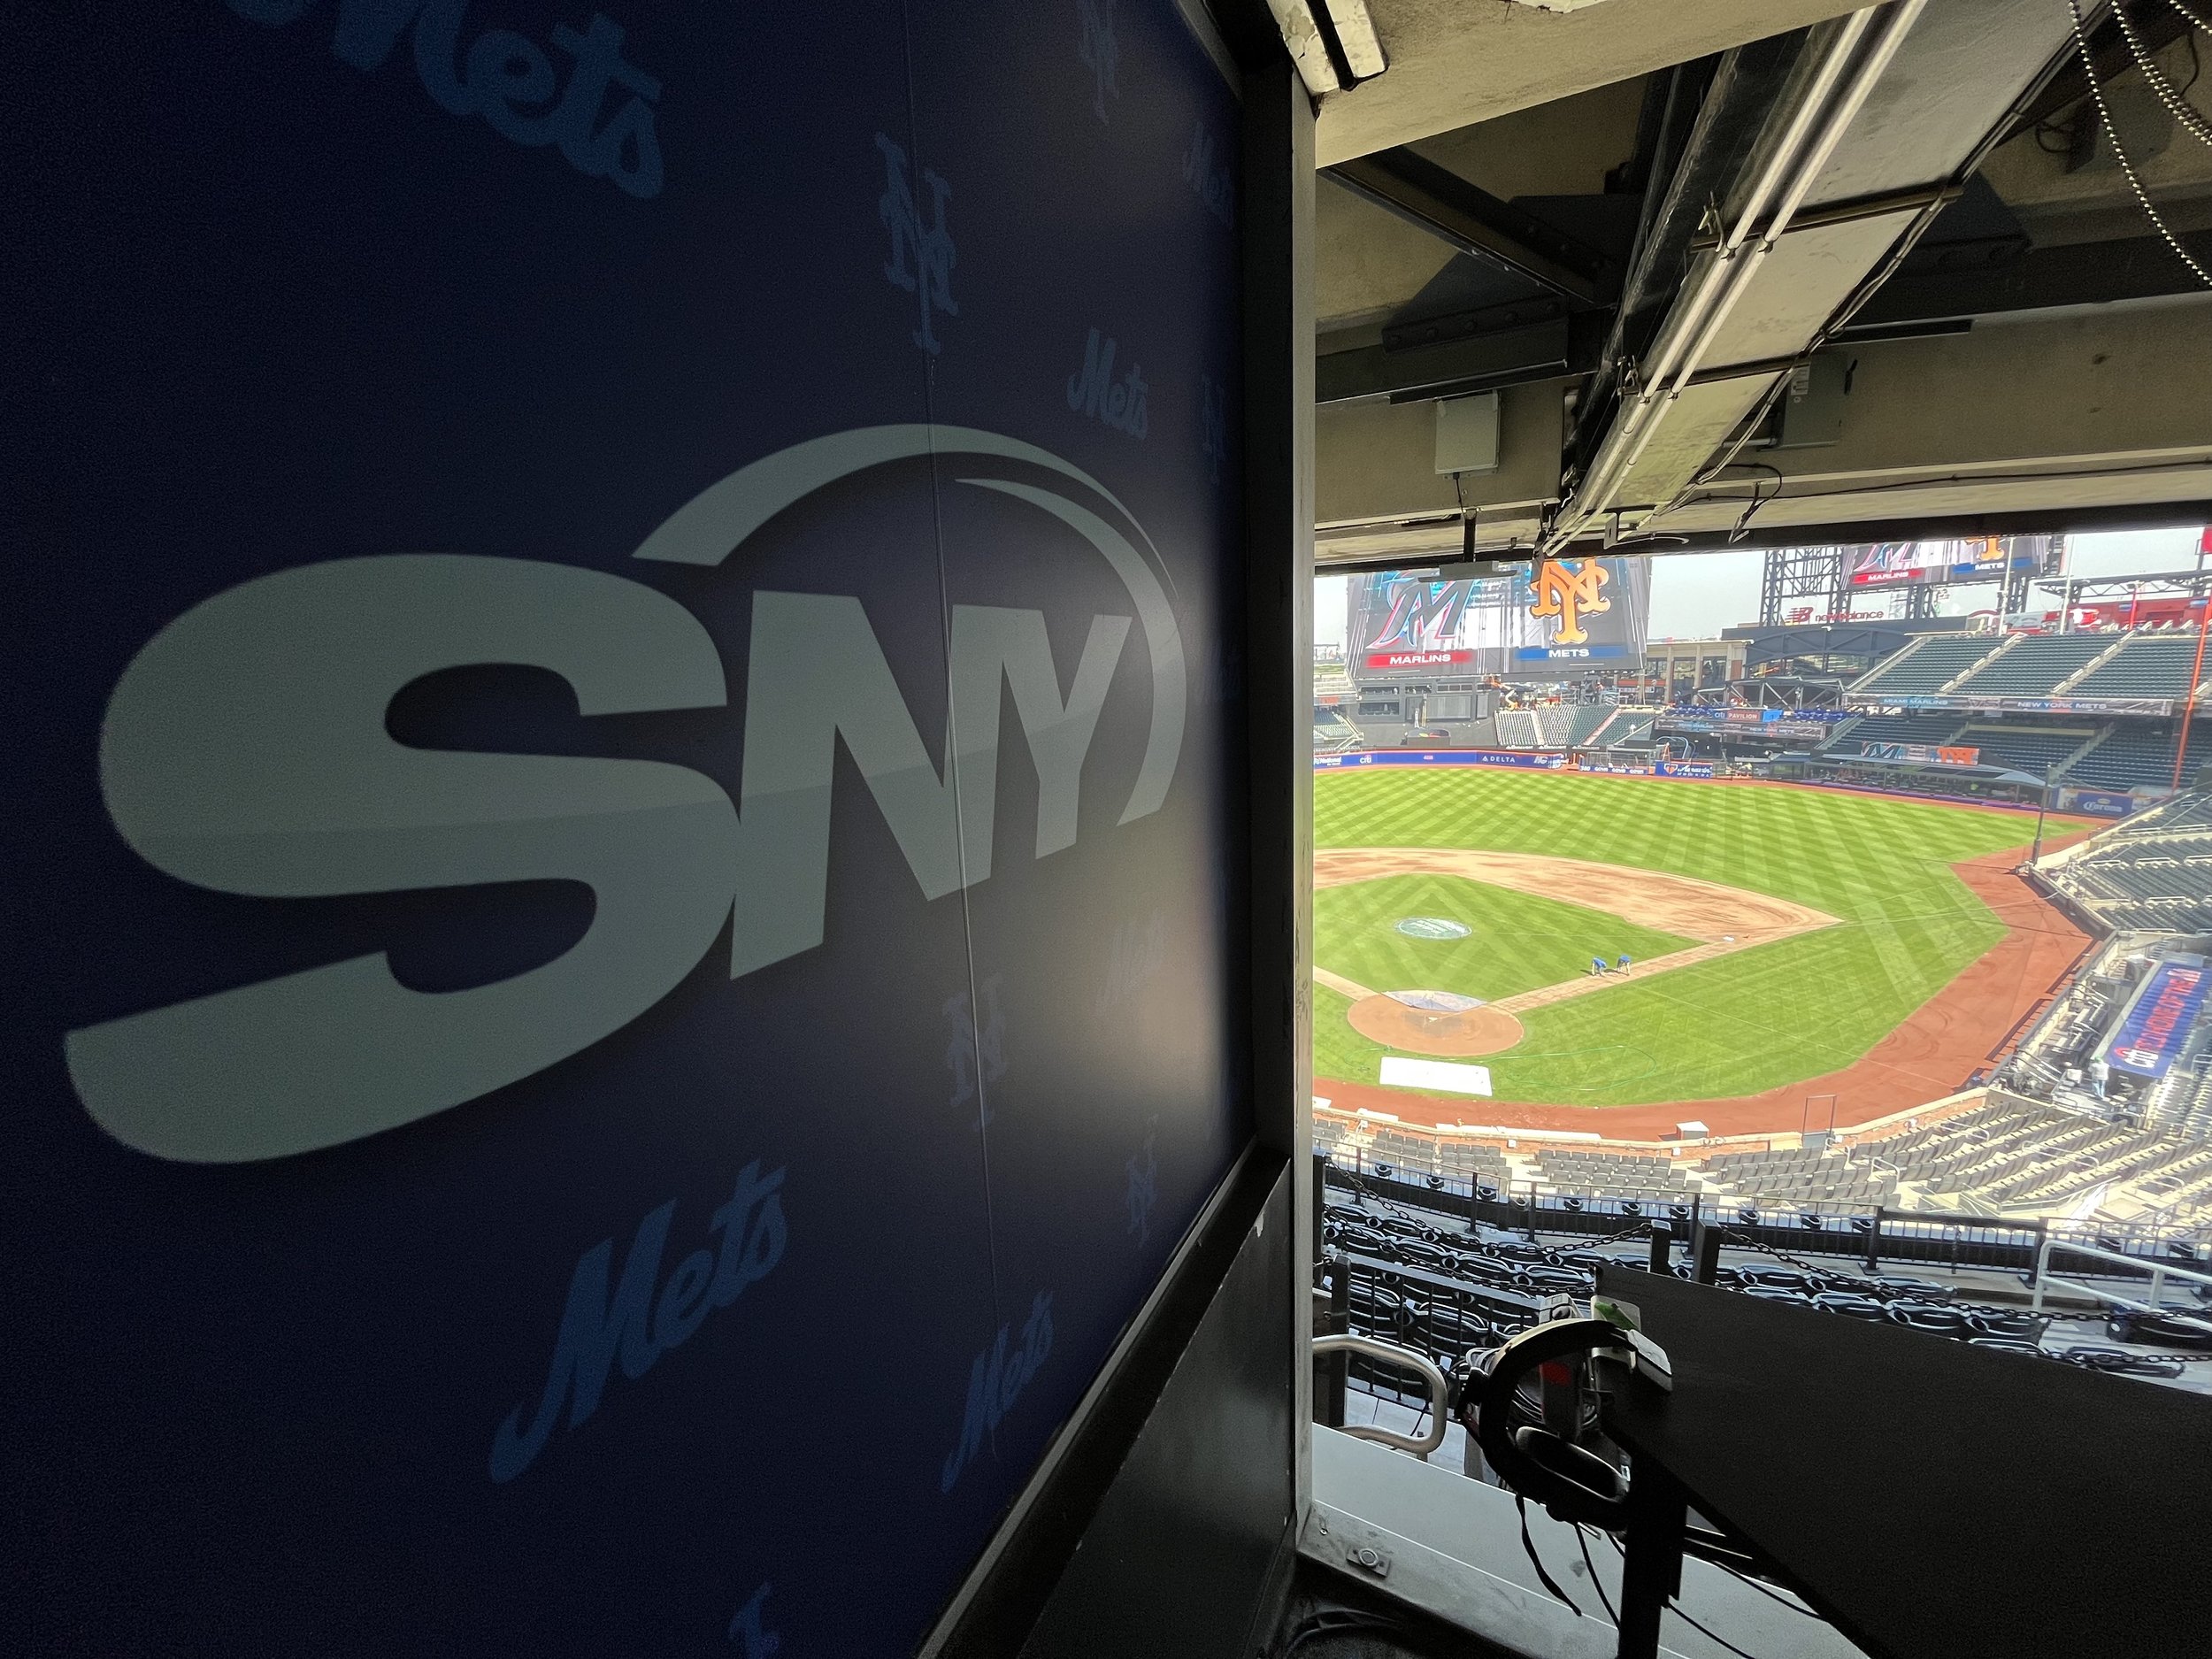 sny with field.jpg